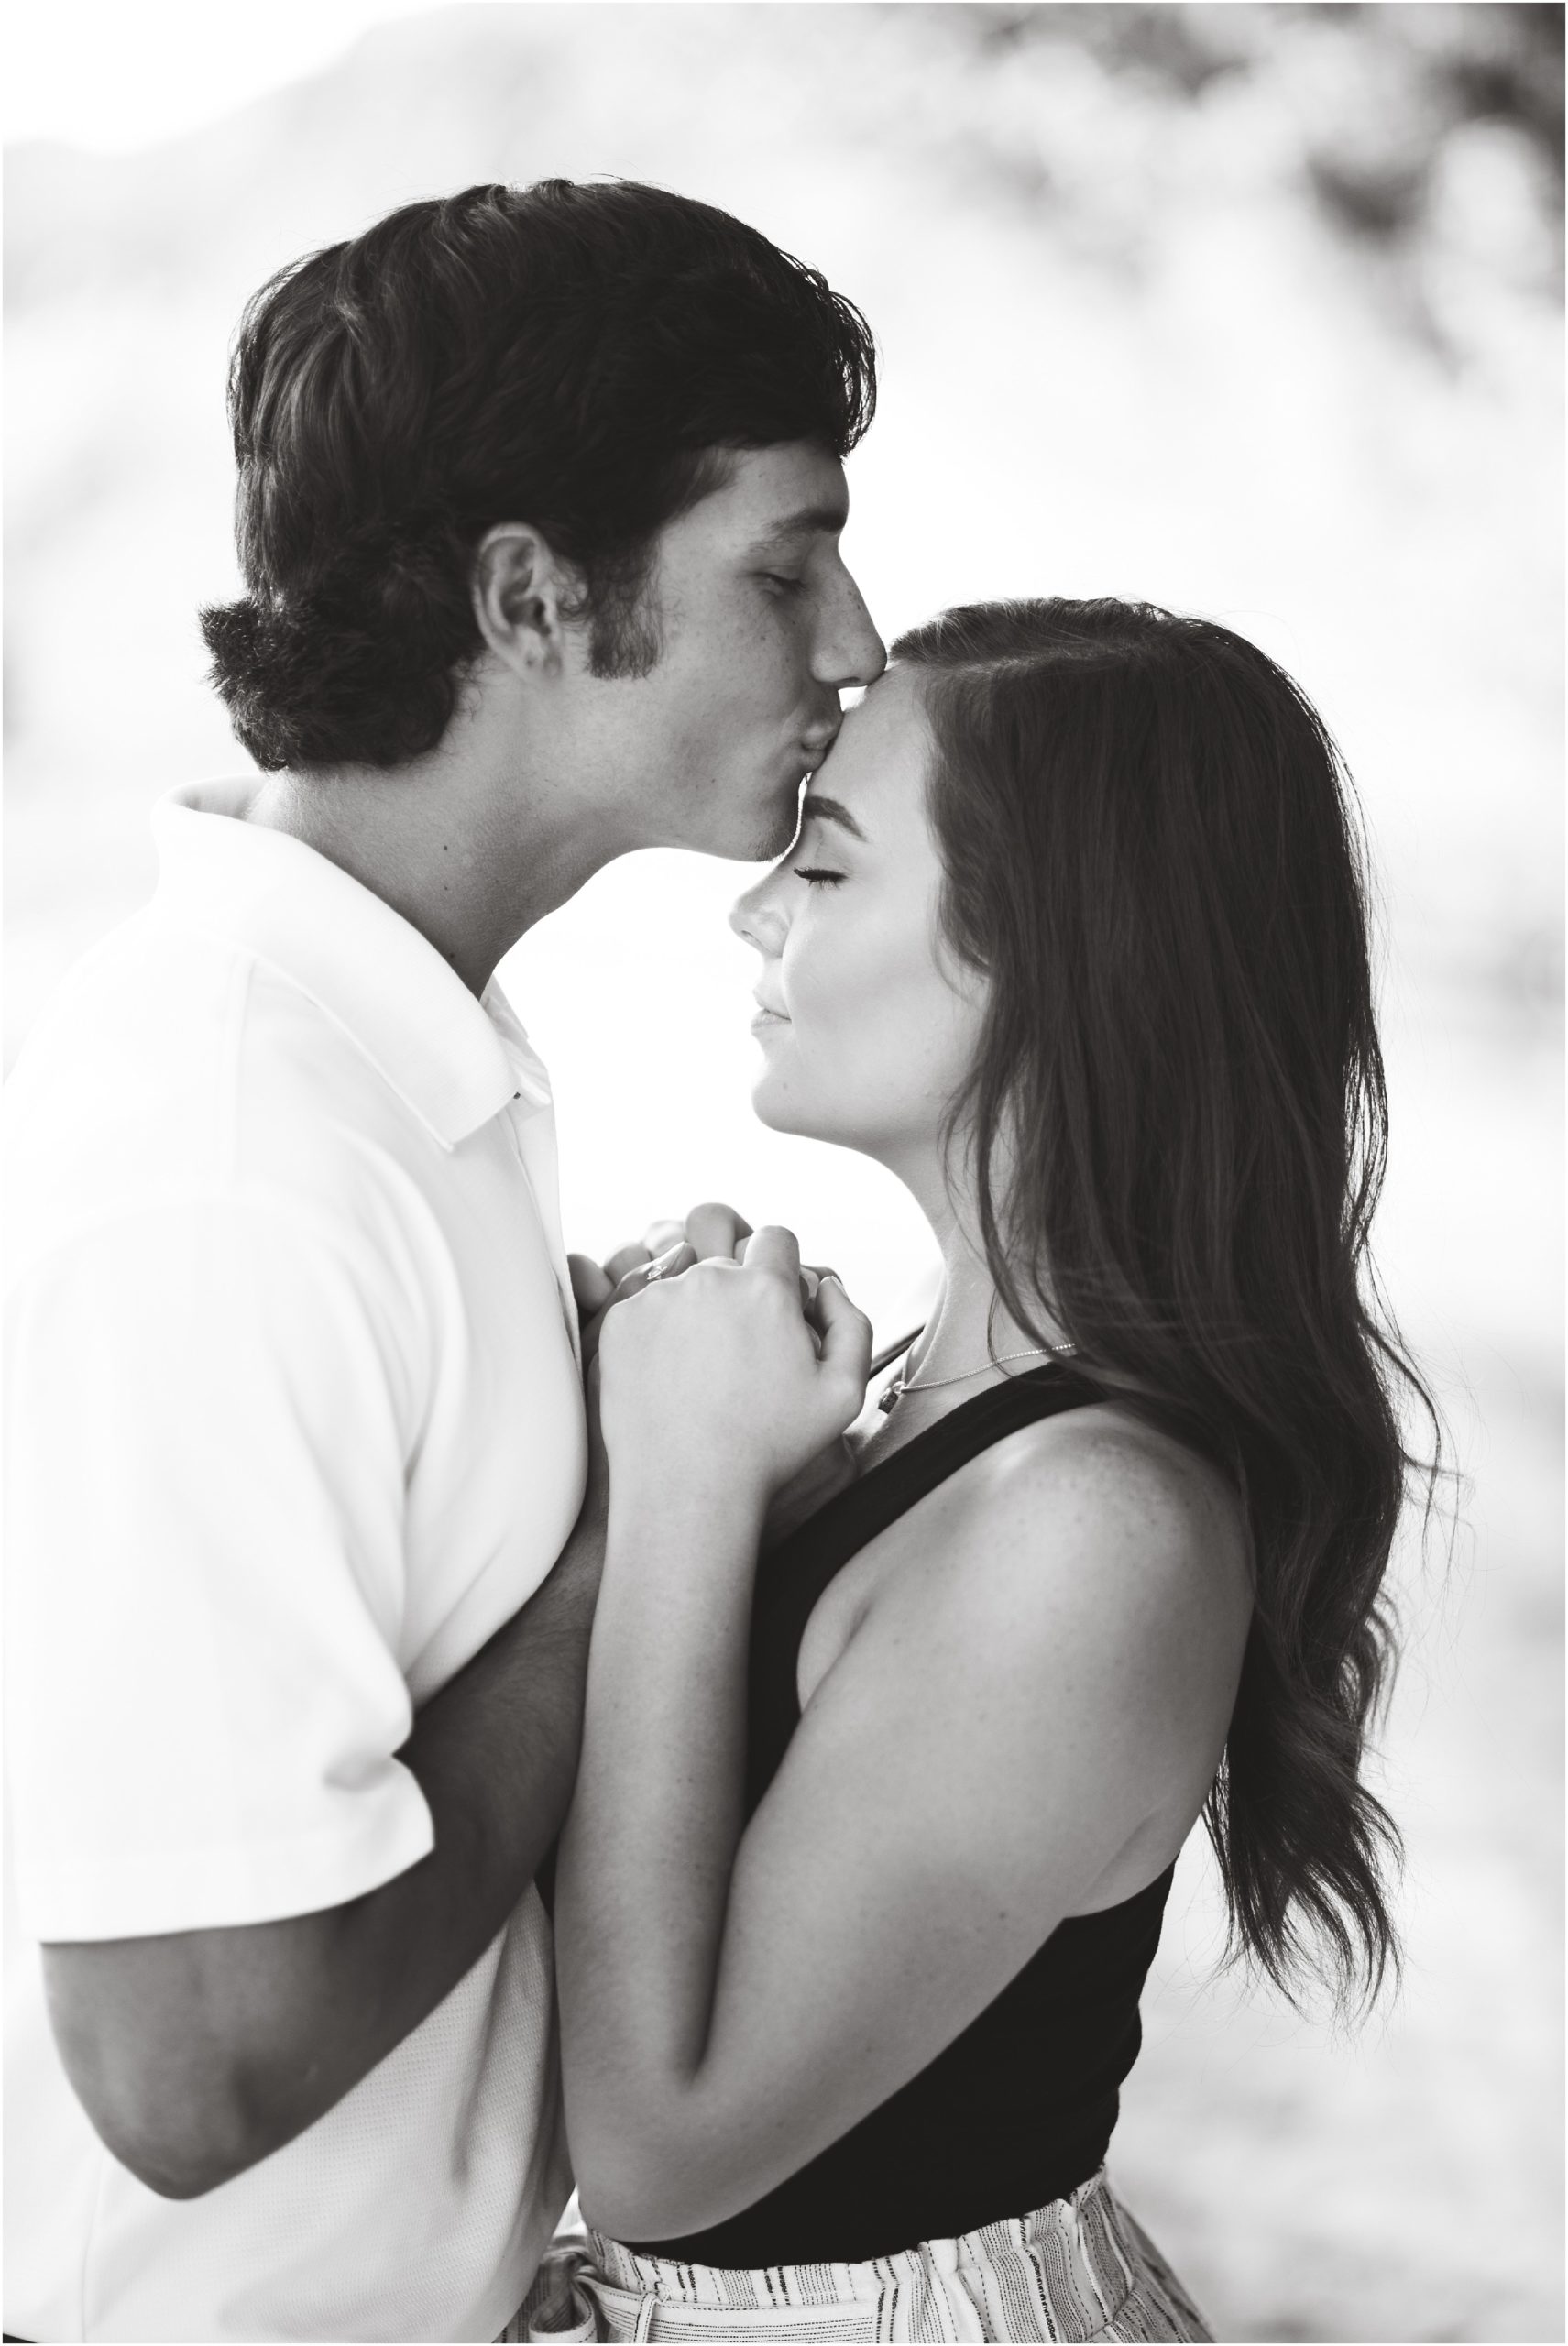 black and white image of boy kissing fiancé on forehead during engagement session